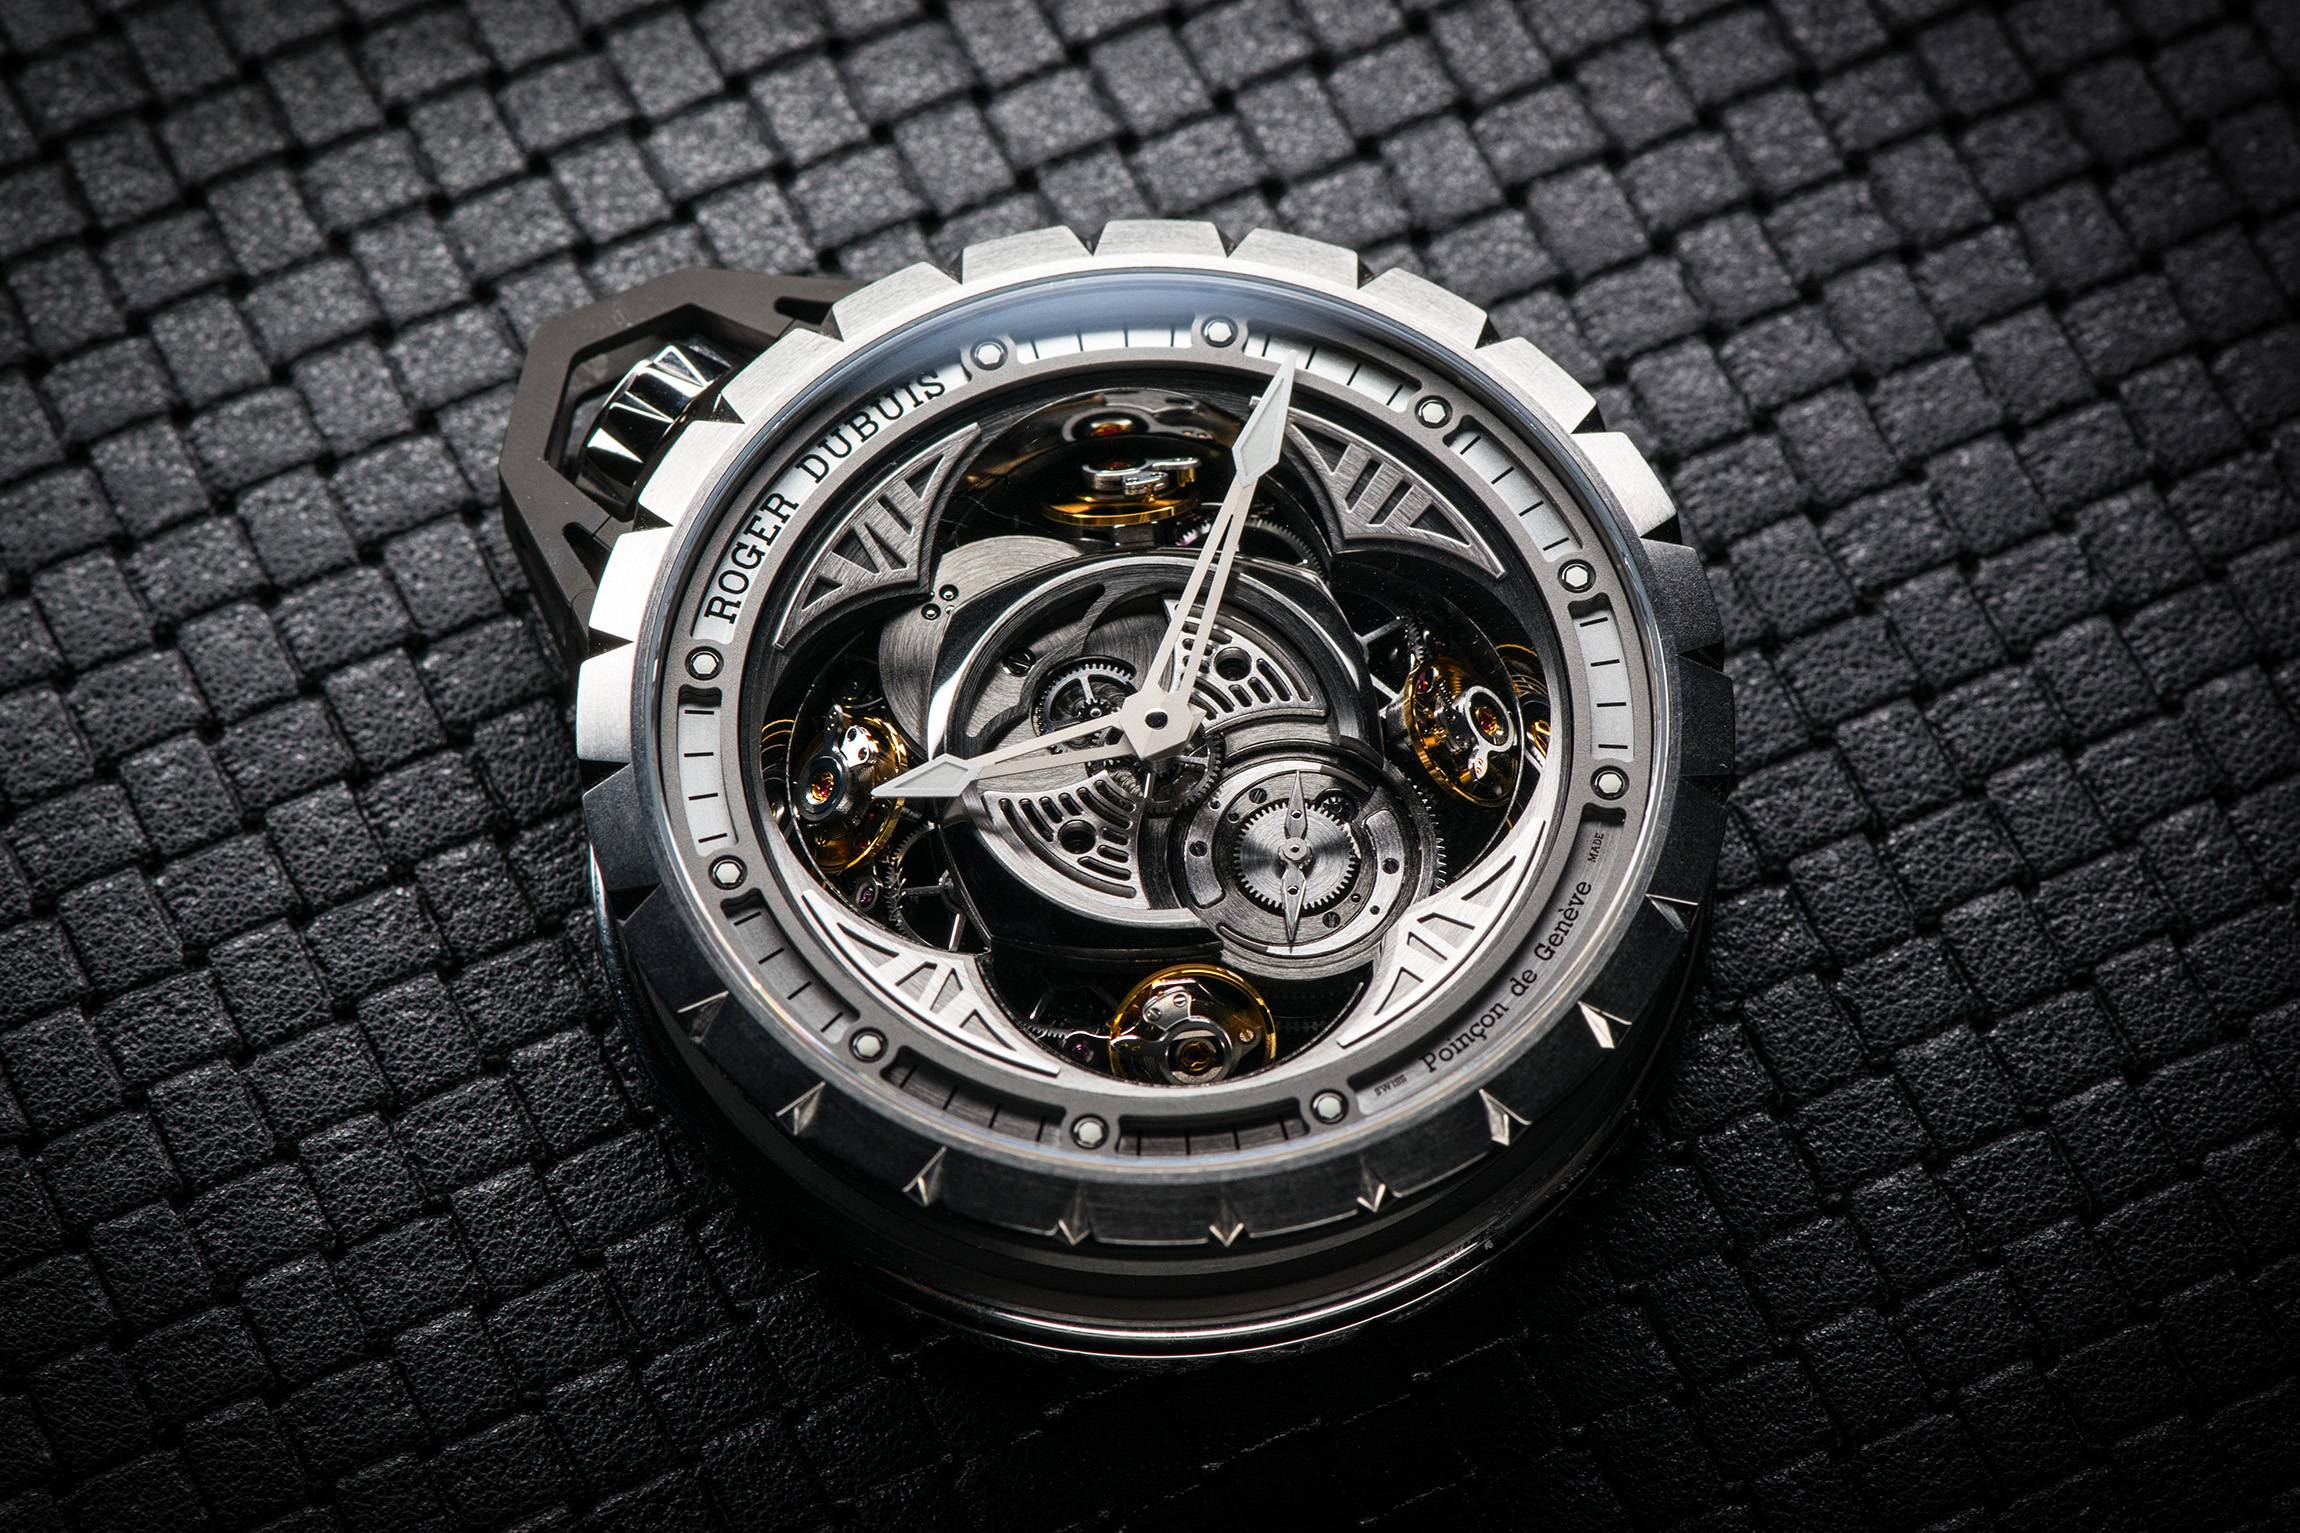 Introducing The Roger Dubuis Excalibur Spider Pocket Time Instrument, A Half A Million Dollar Pocket Watch